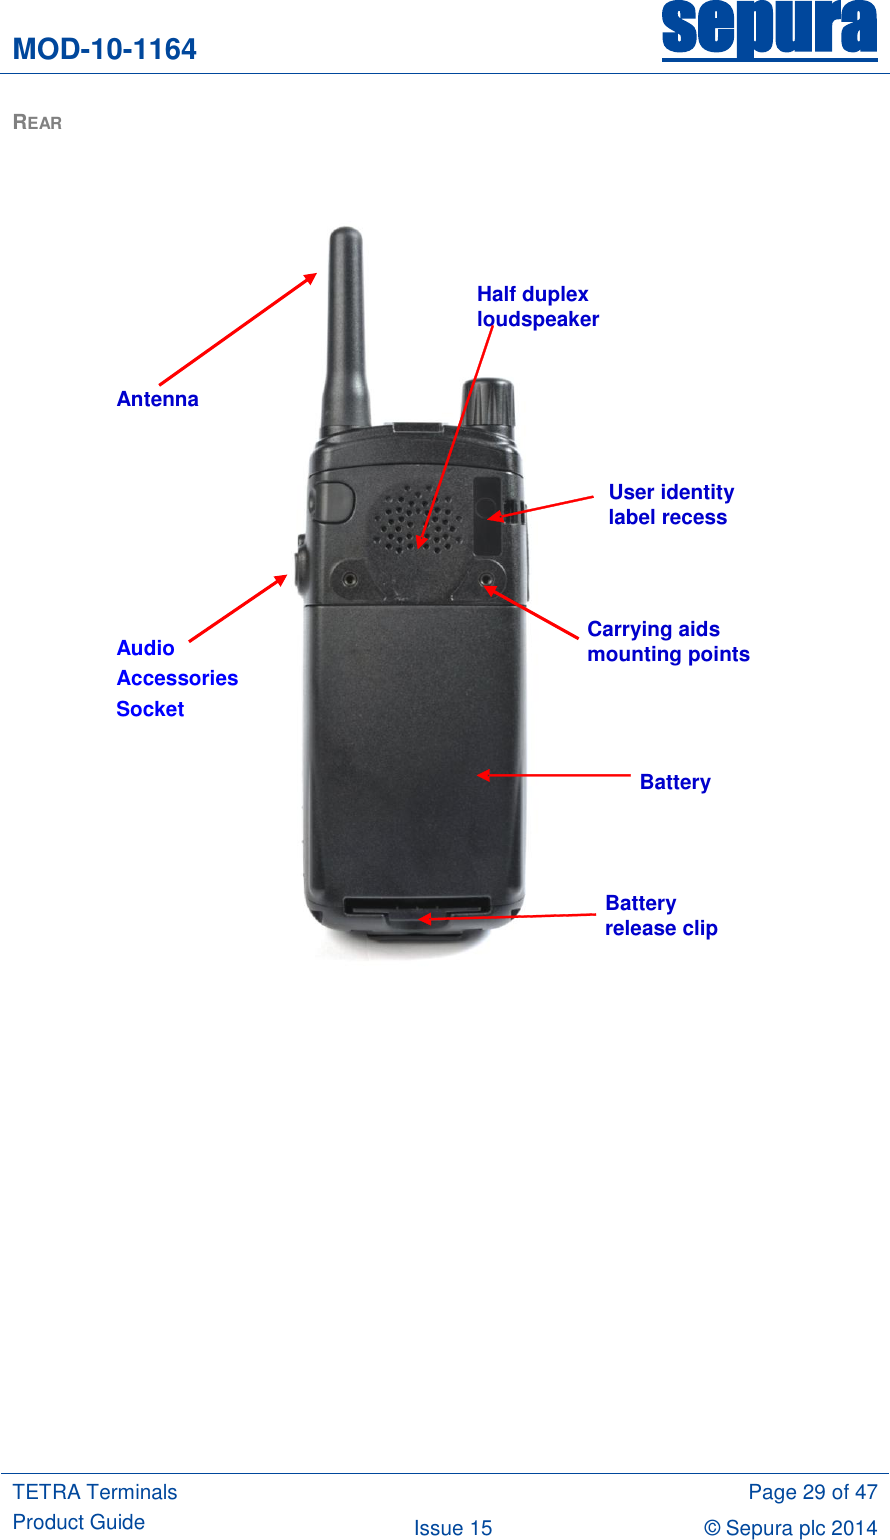 MOD-10-1164 sepura  TETRA Terminals Product Guide  Page 29 of 47 Issue 15 © Sepura plc 2014   REAR                  Half duplex  loudspeaker Antenna   User identity  label recess Carrying aids  mounting points Battery Battery  release clip Audio Accessories Socket 